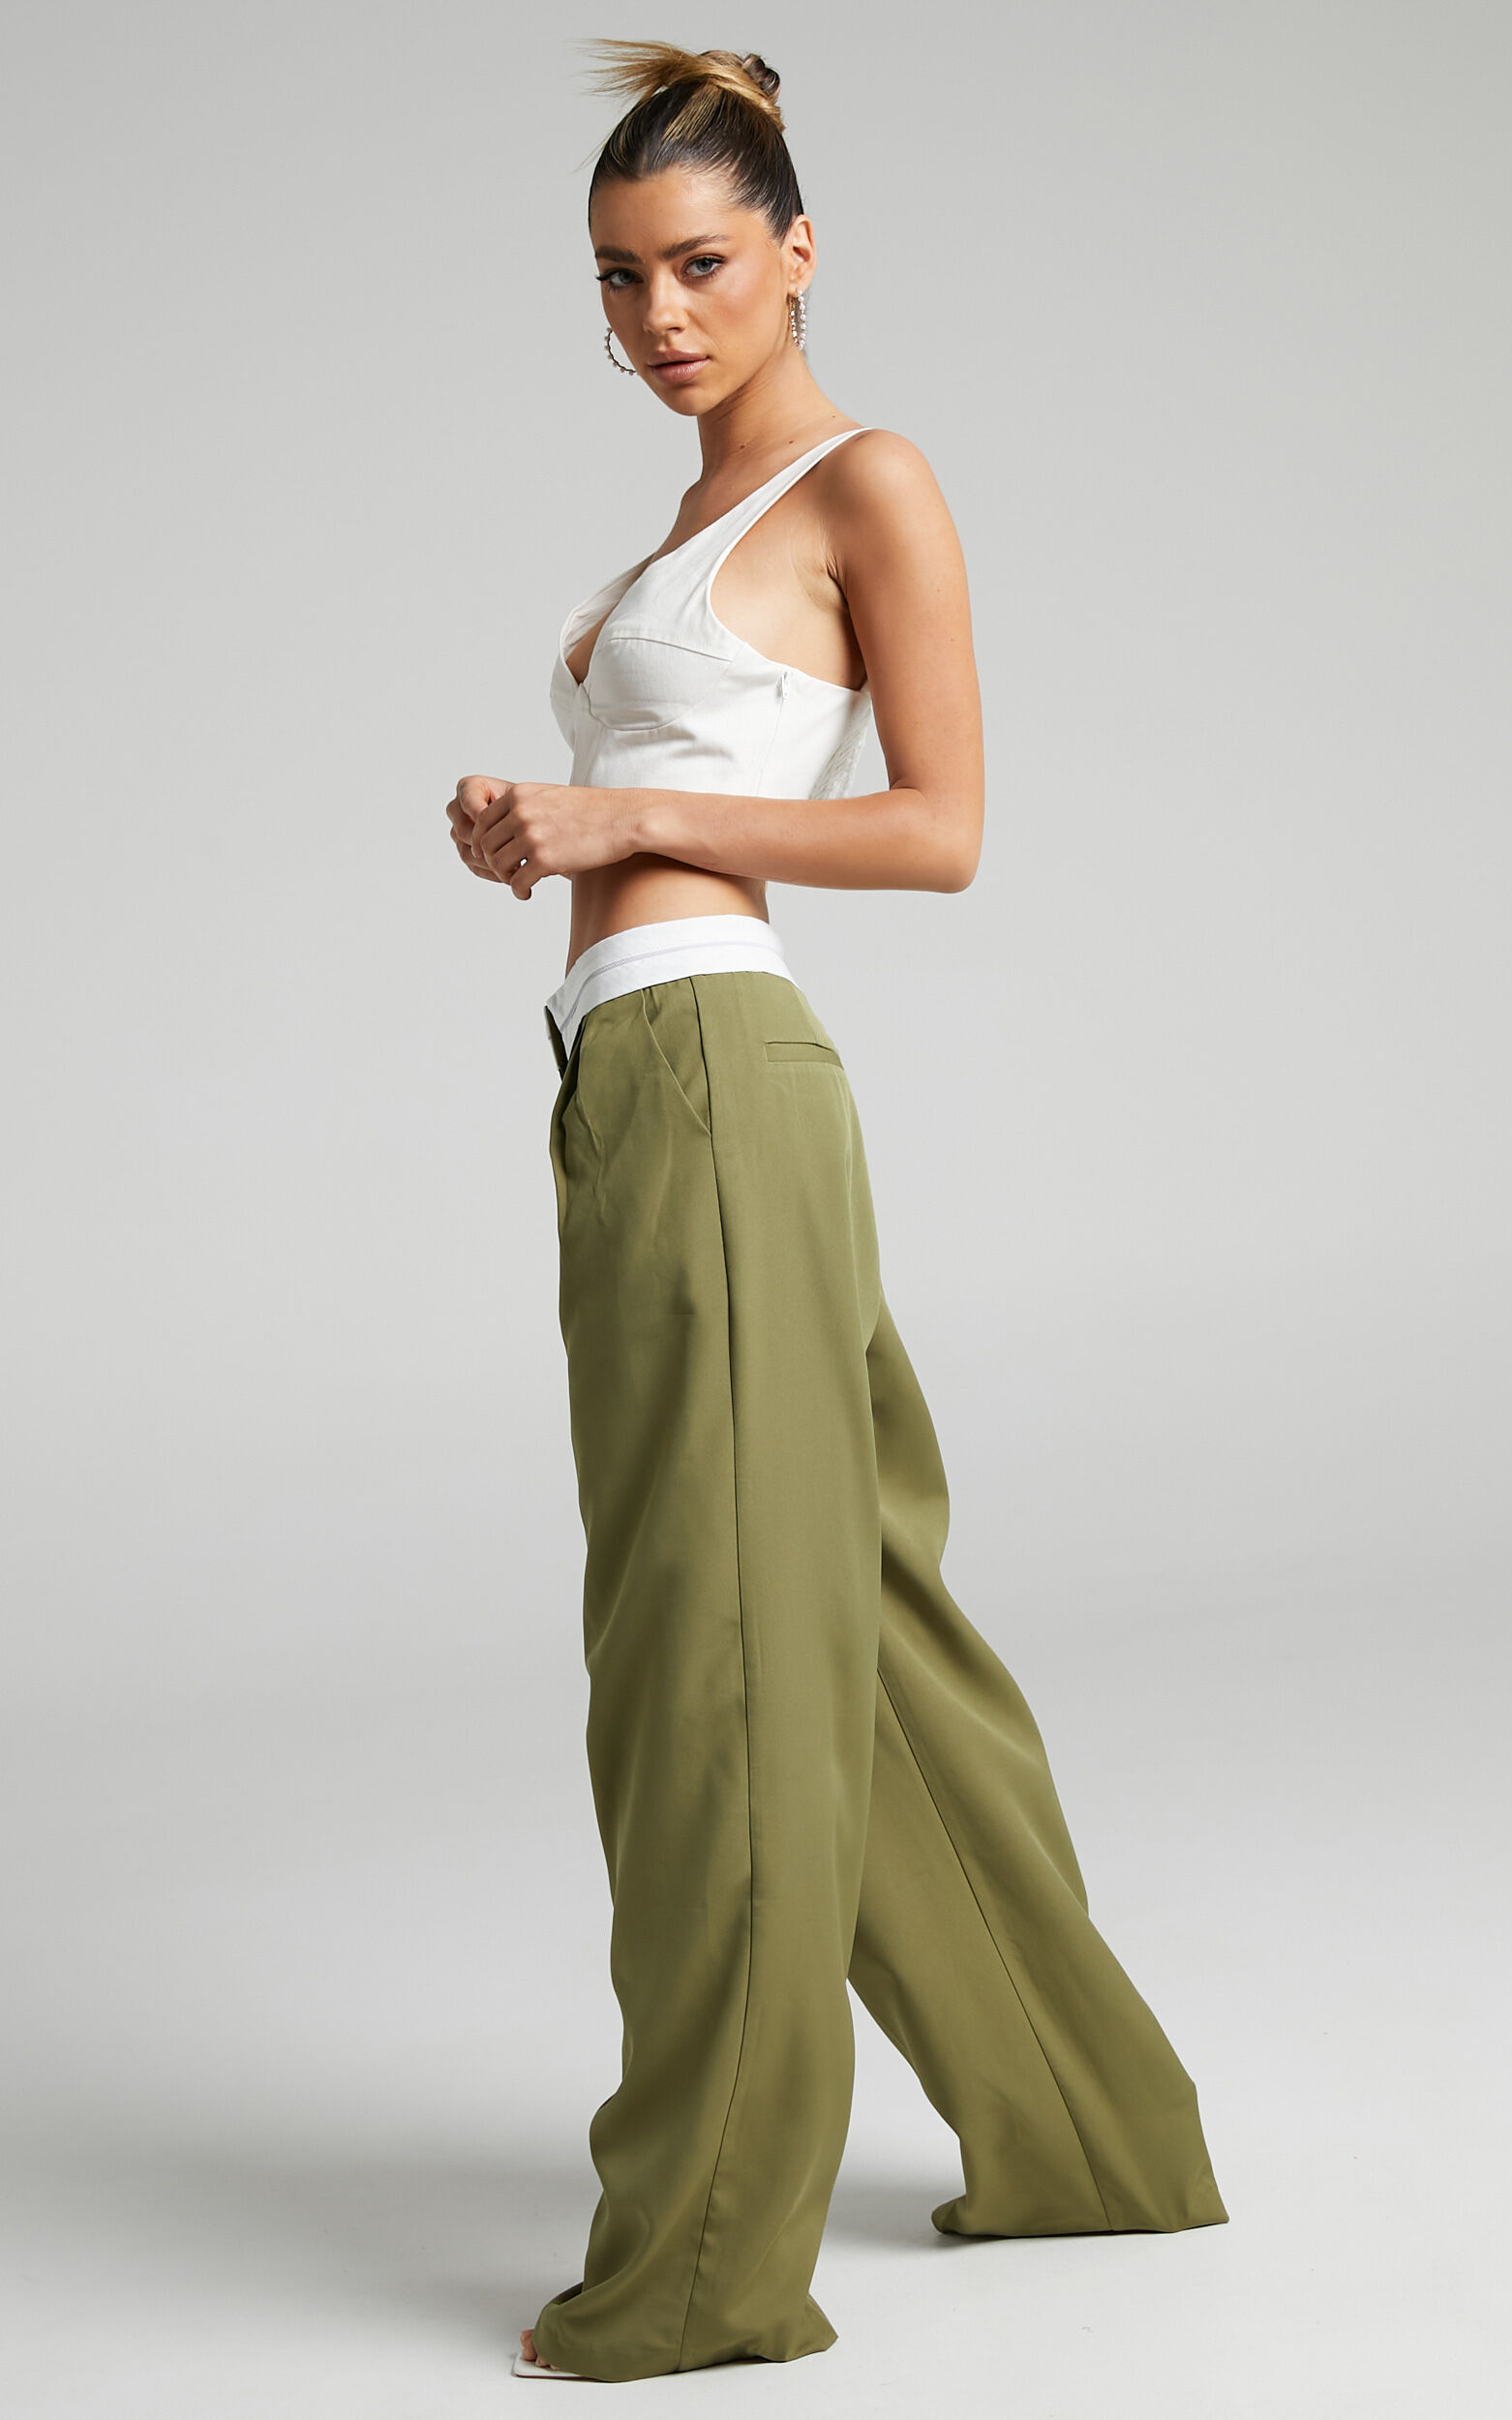 Lioness - City of Angels Pant in Jungle Green - L, GRN1, super-hi-res image number null